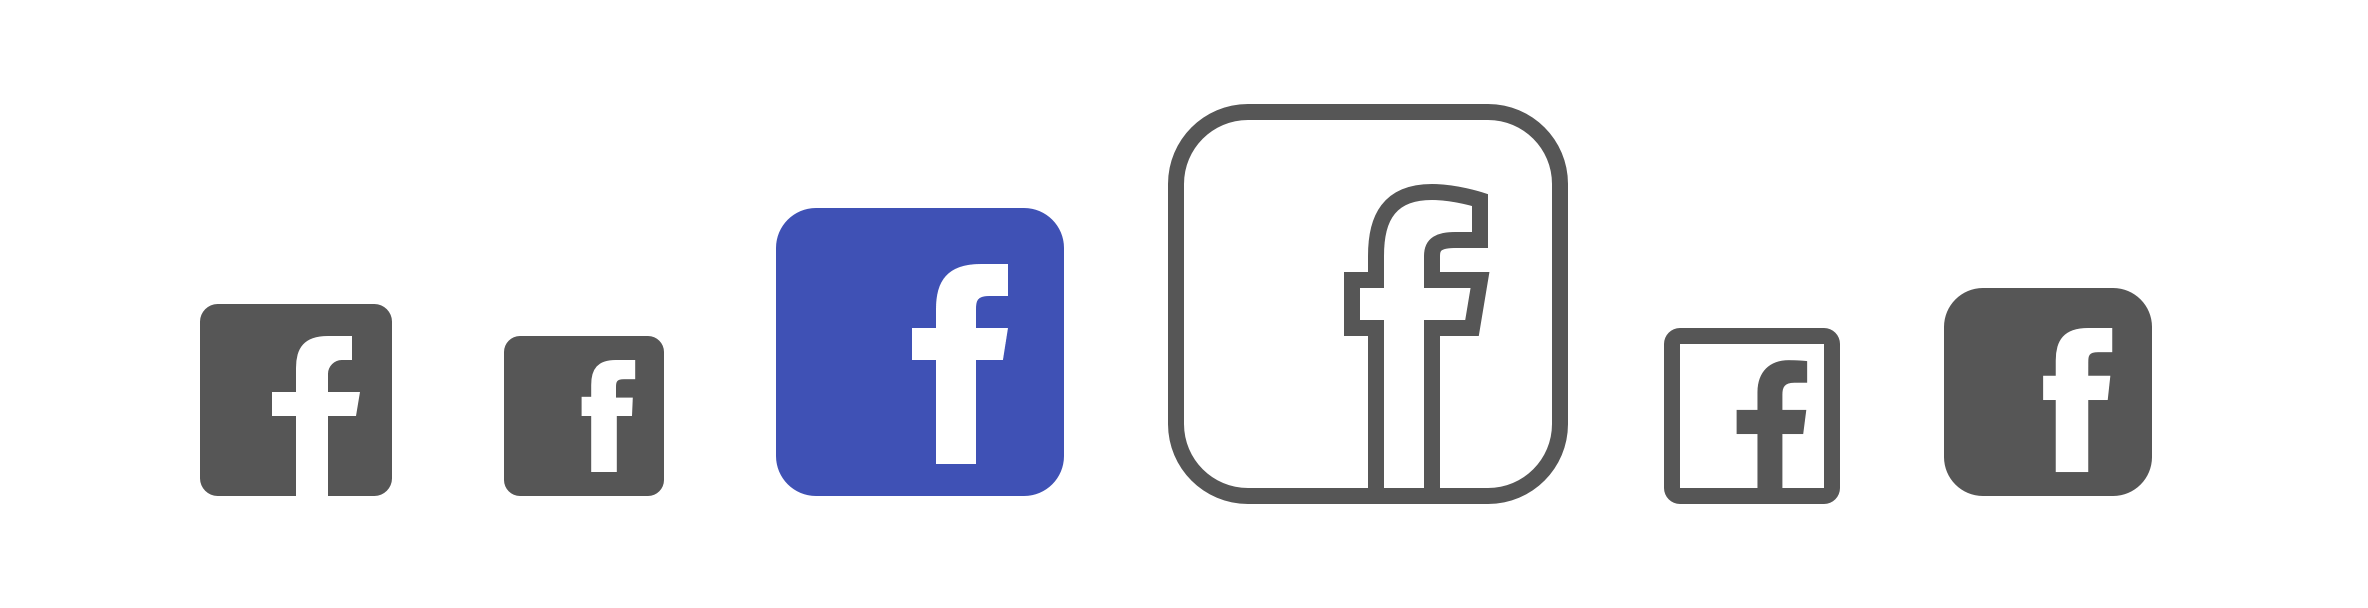 Faceboook Logo - Facebook Icon - free download, PNG and vector